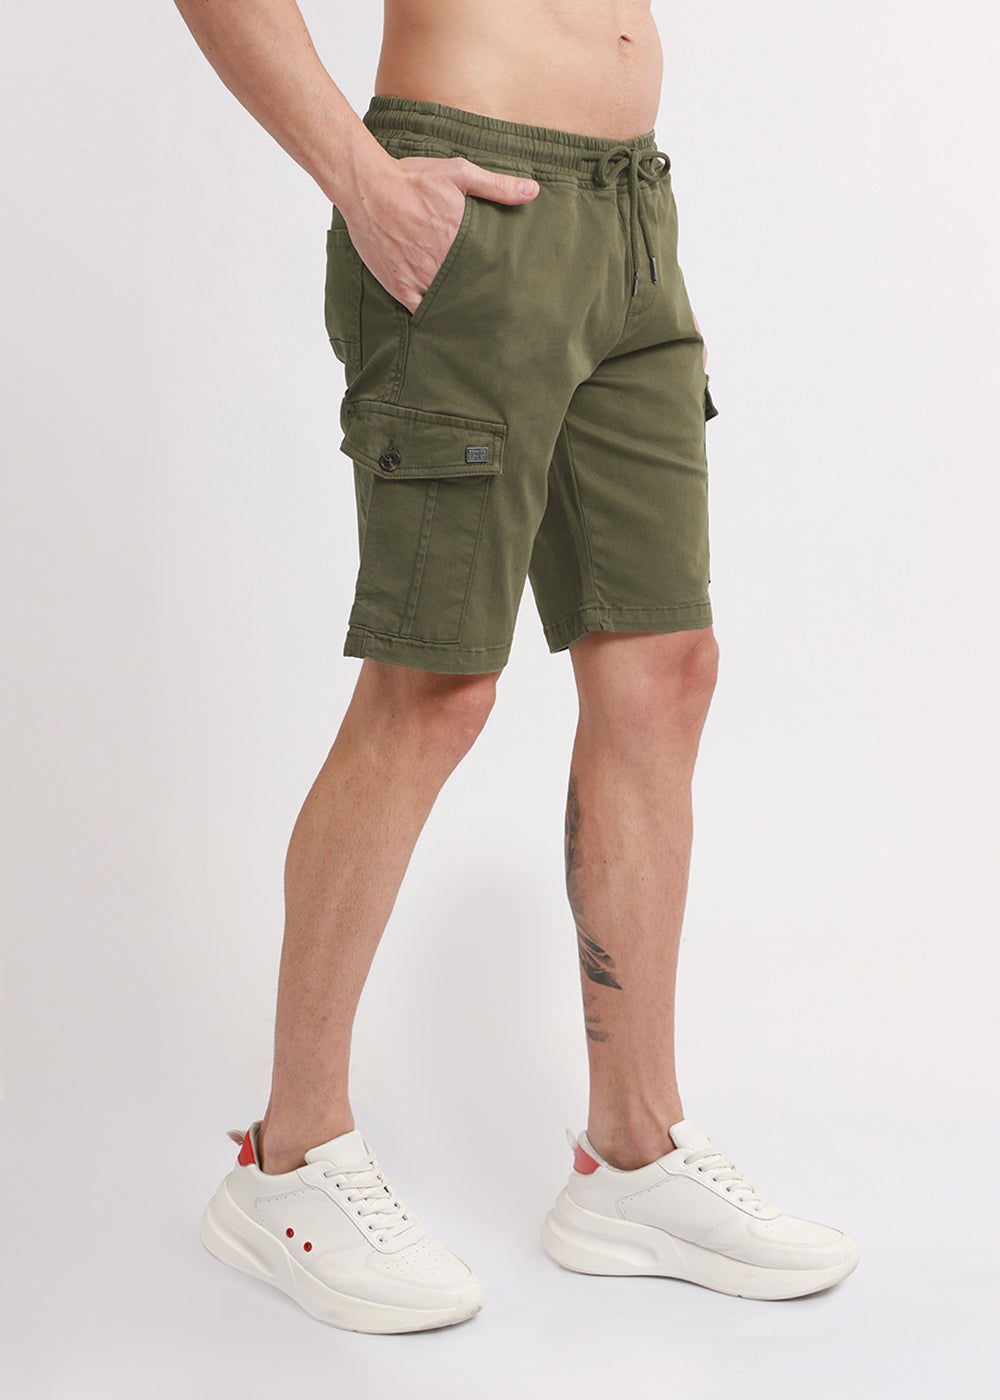 Buy Olive Green Cotton Cargo Shorts